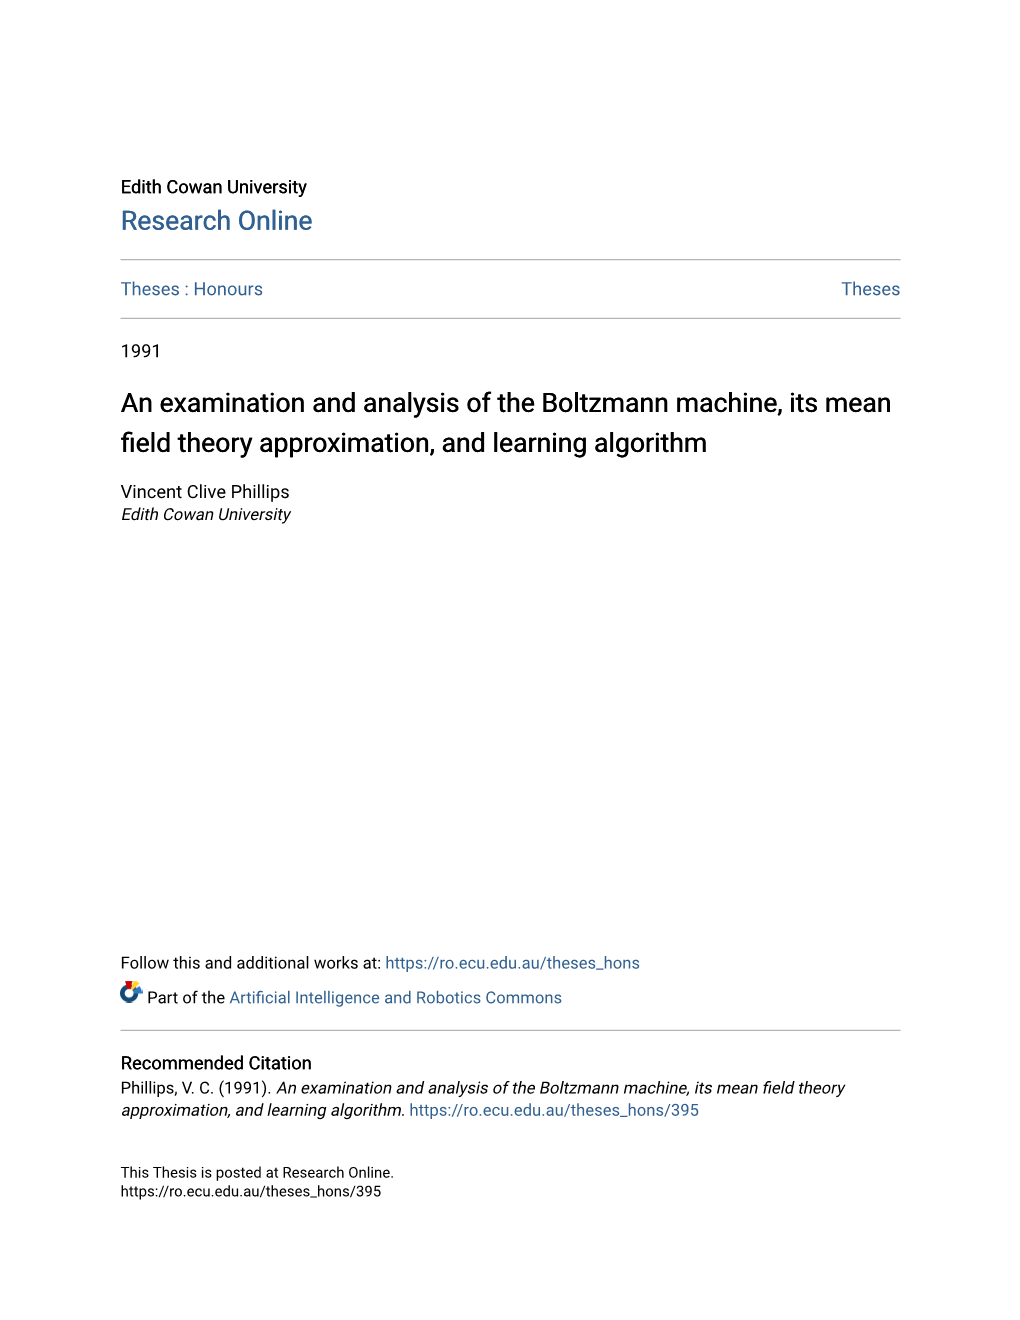 An Examination and Analysis of the Boltzmann Machine, Its Mean Field Theory Approximation, and Learning Algorithm